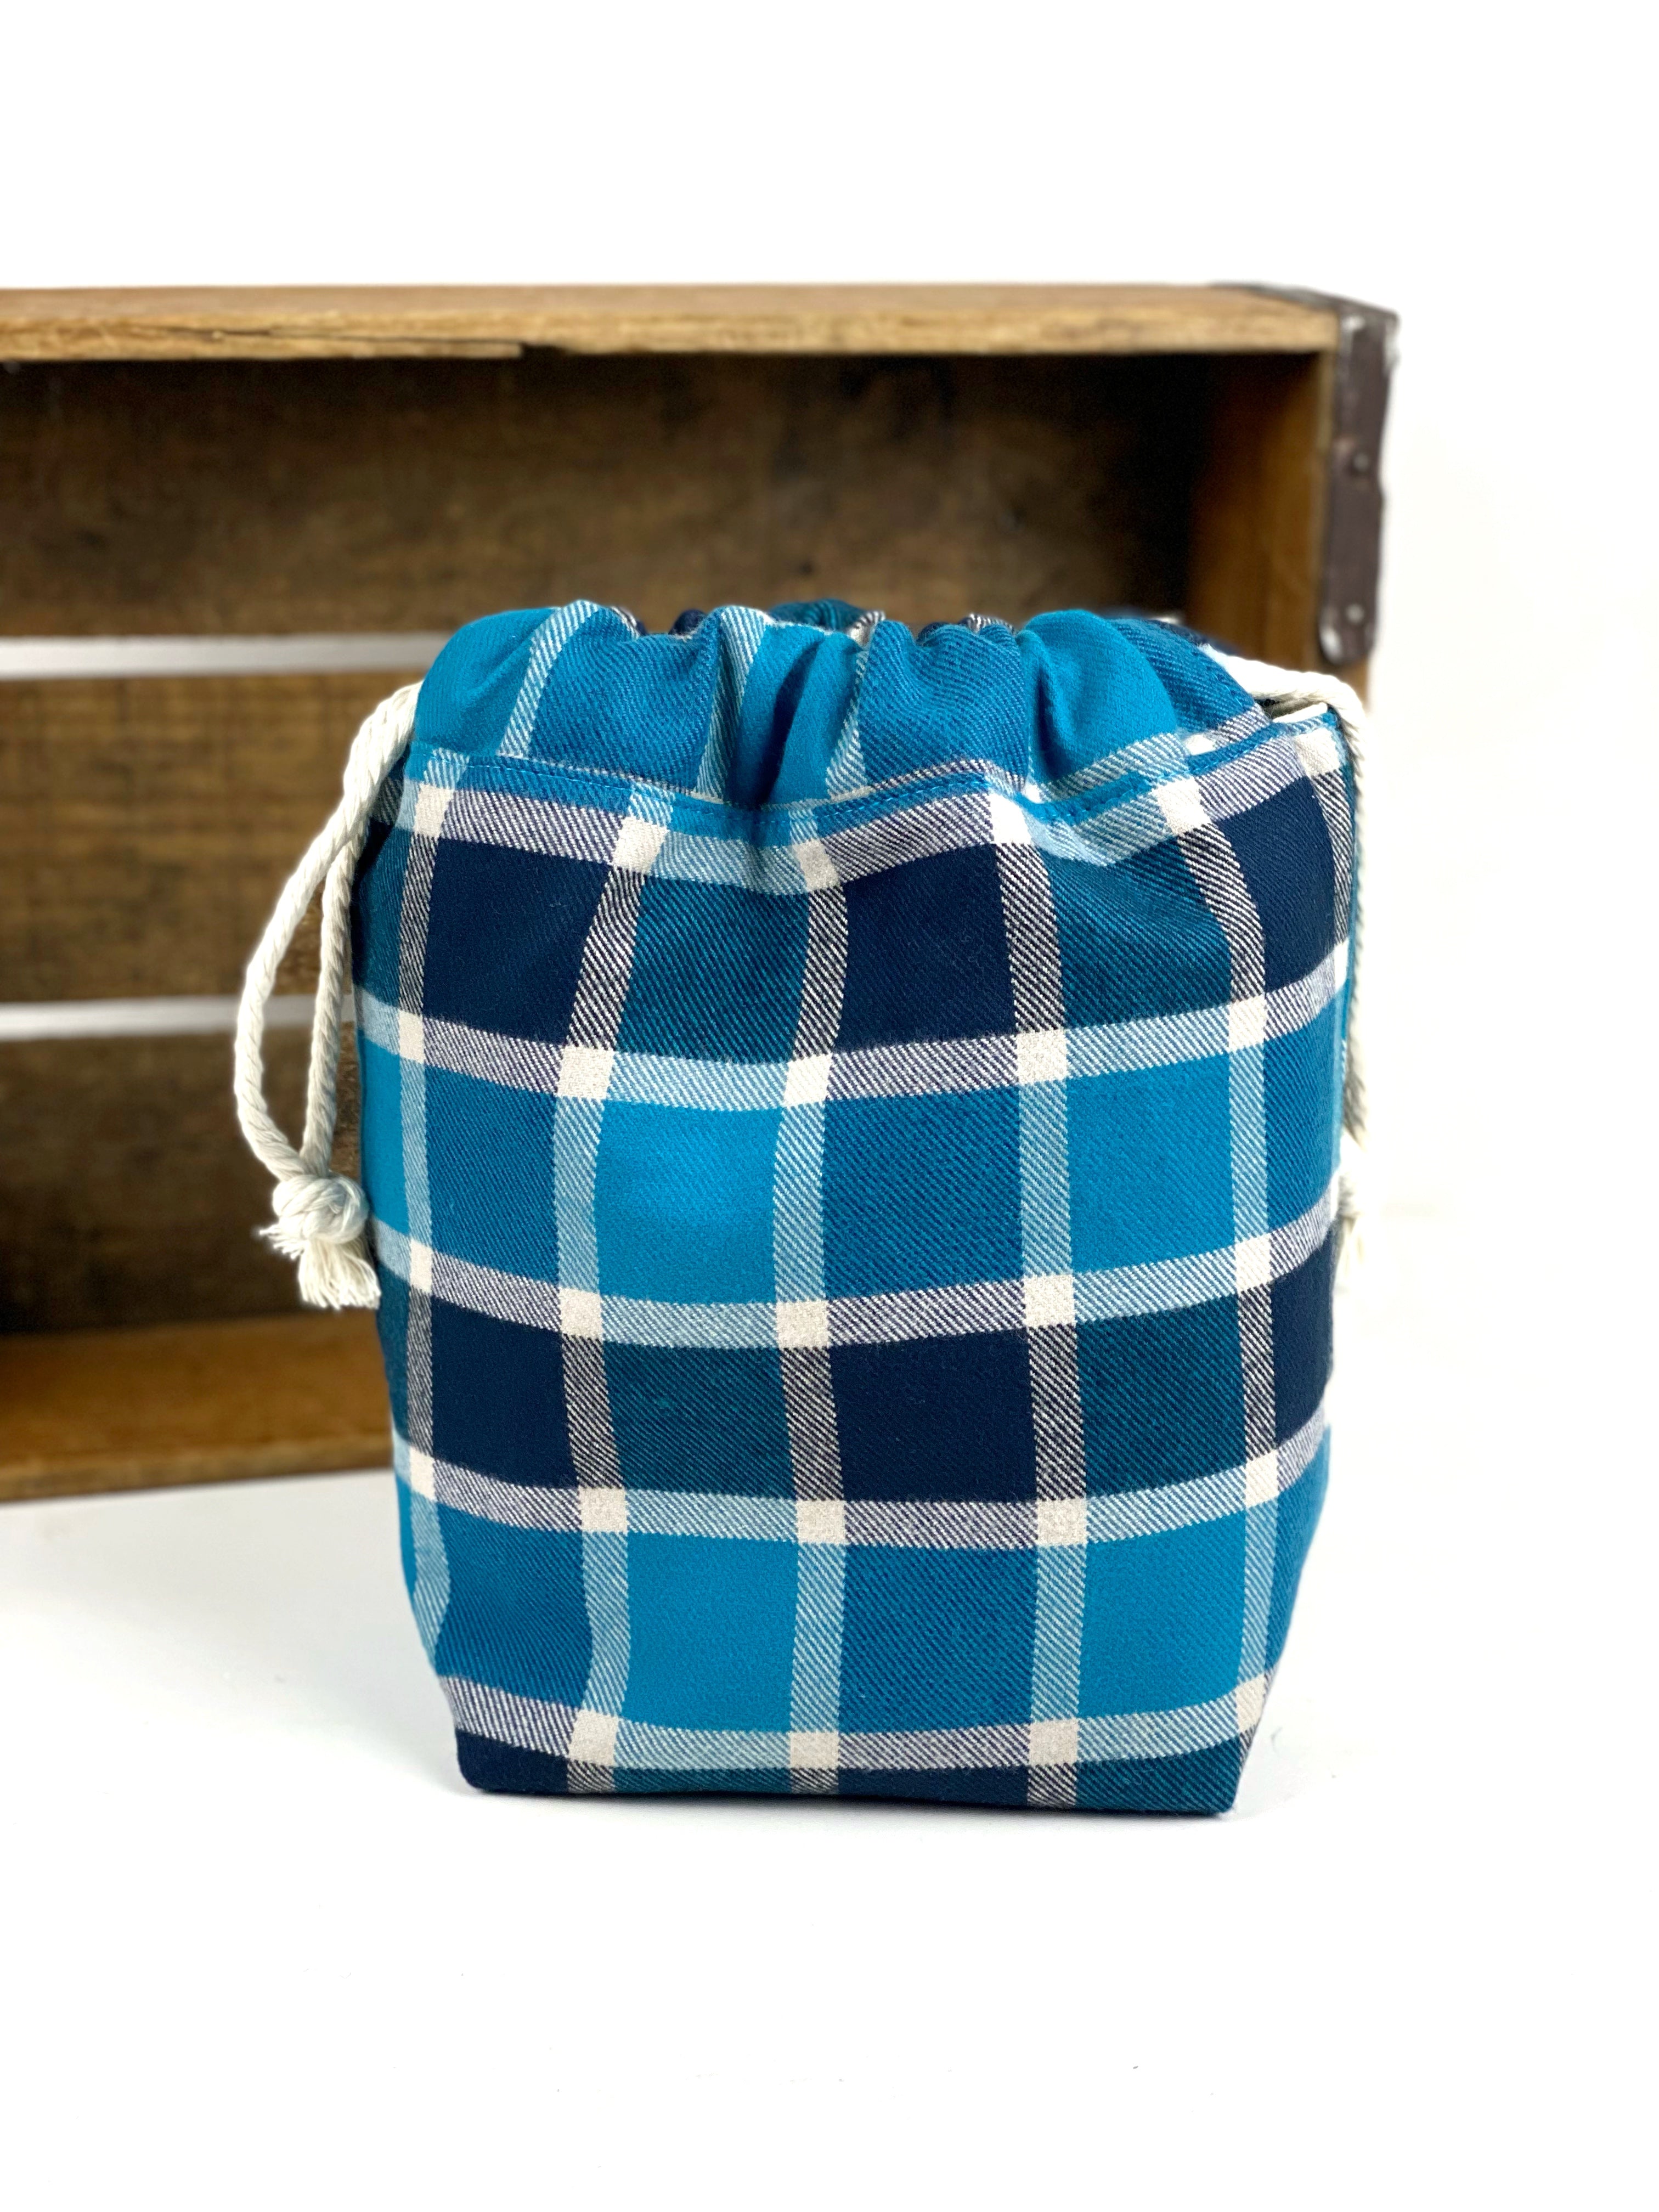 Wool or Flannel Small Sock or Hat Drawstring Project Shoe Storage Bag